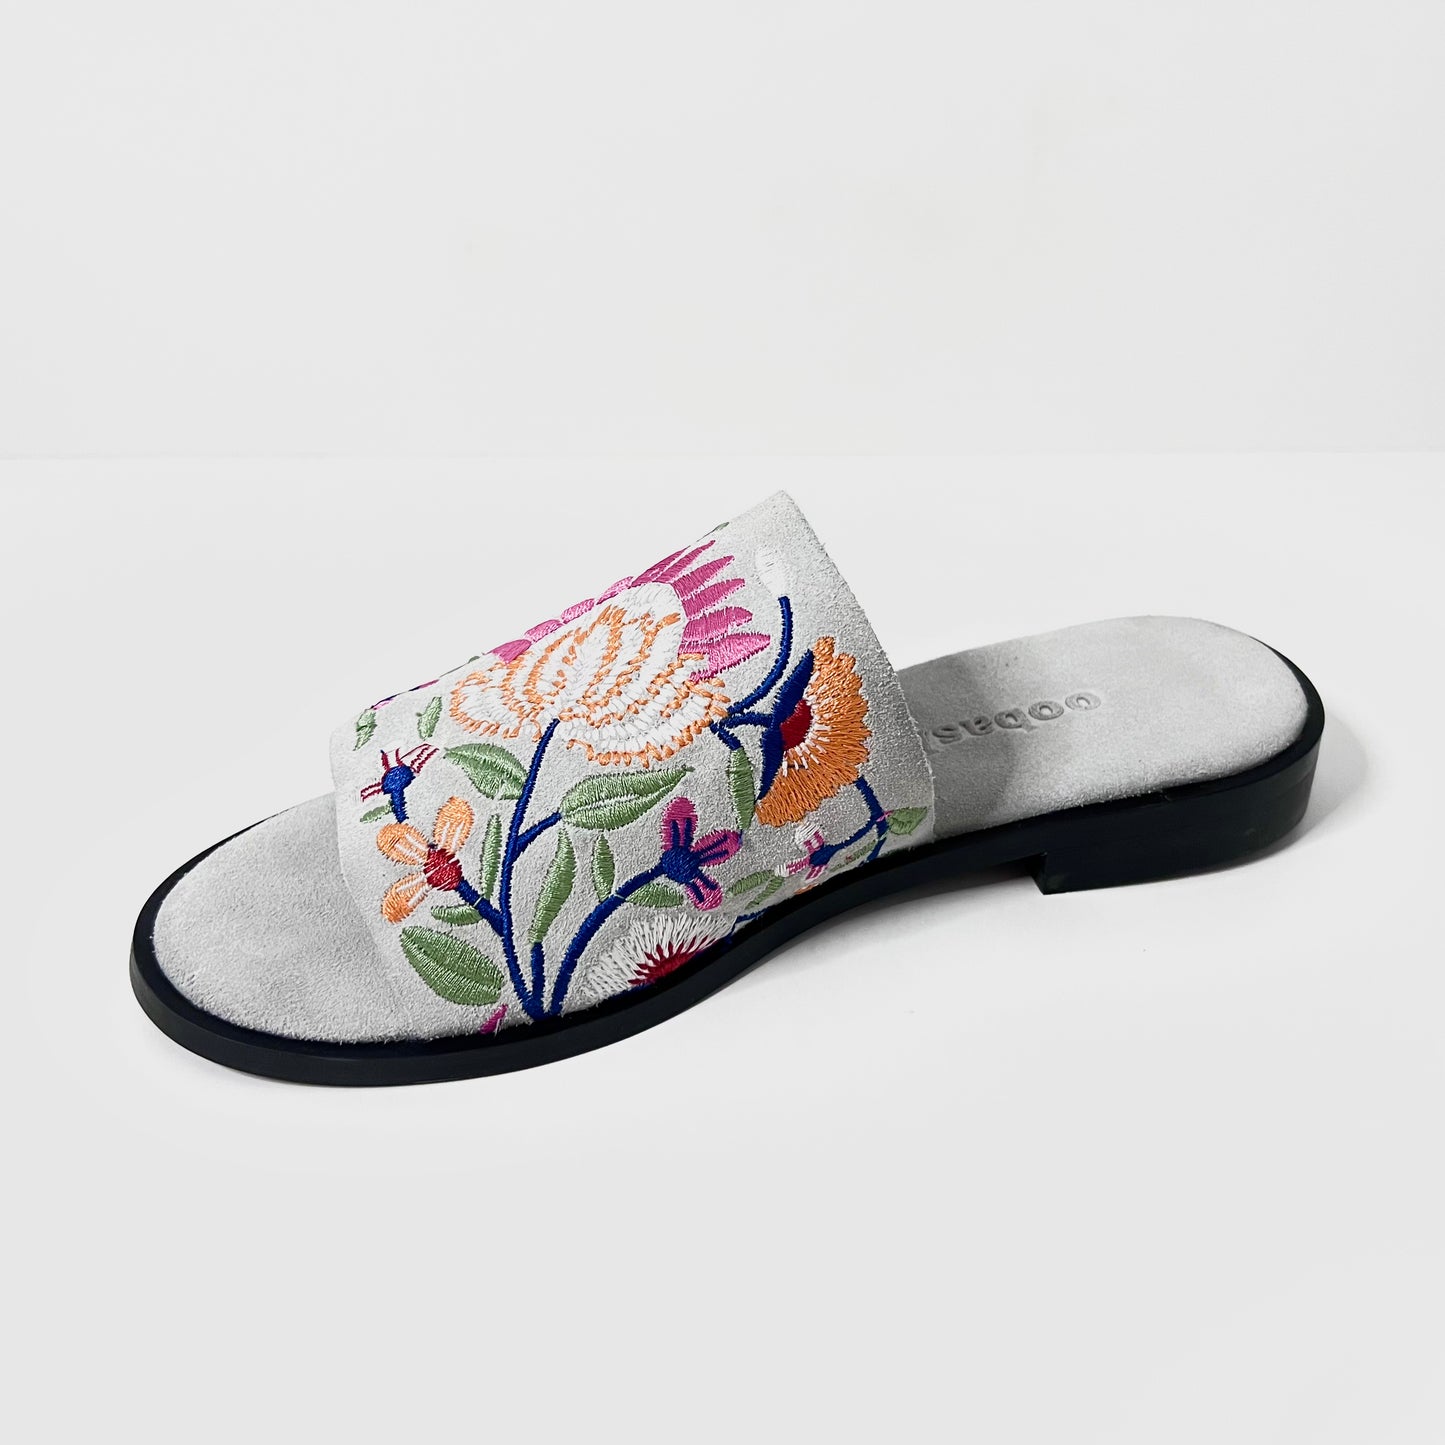 oobash Rose ice off white embroidered suede leather Mule sandal